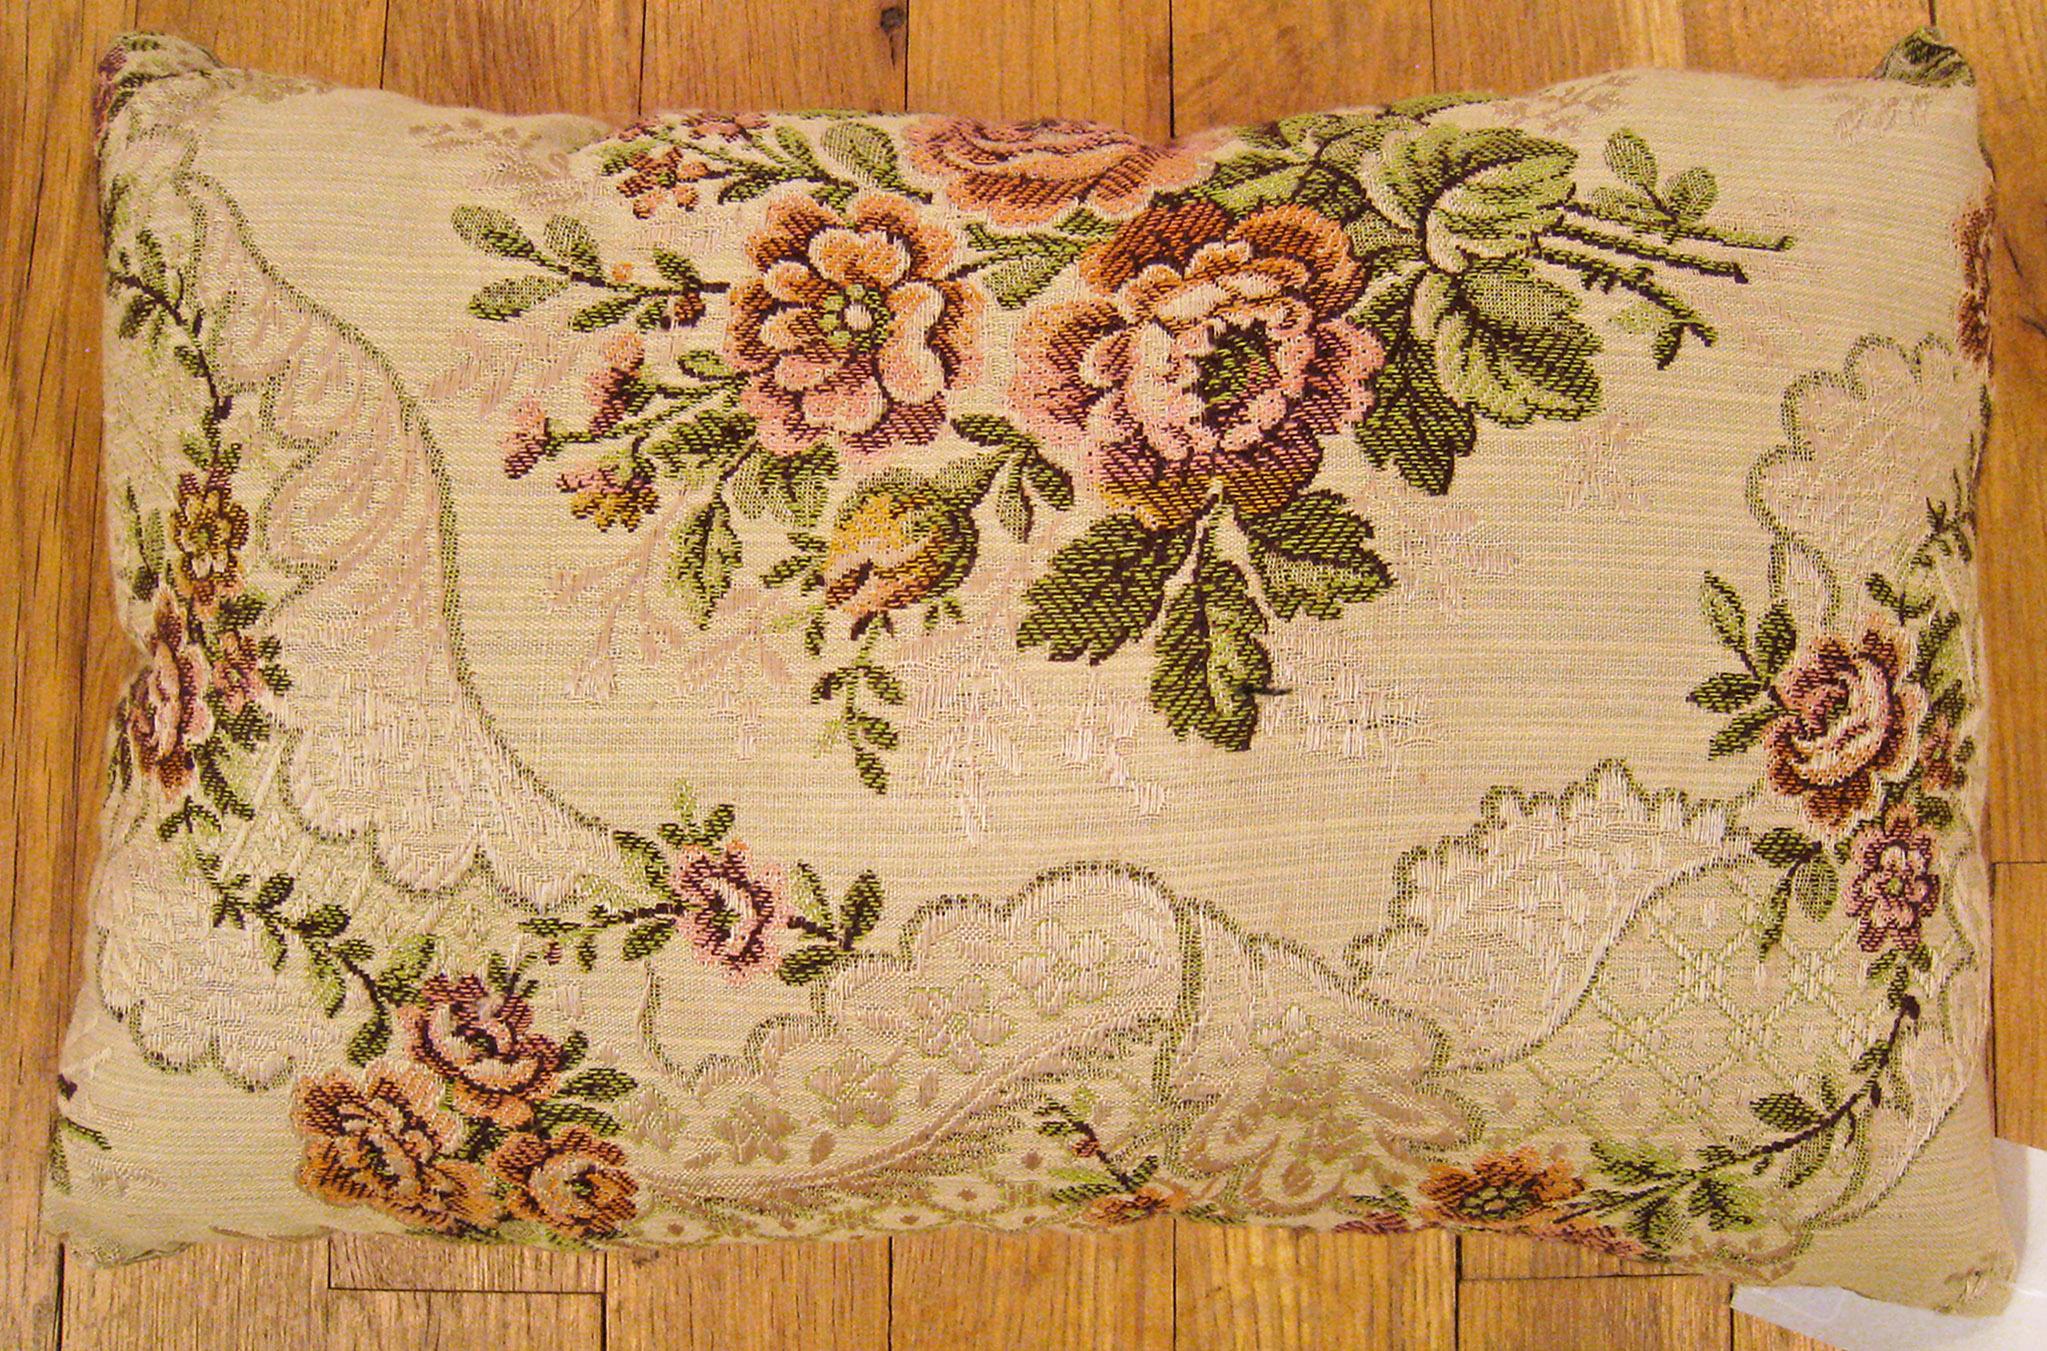 Antique Jacquard Tapestry pillow; size 0'10” x 1'3”. 

An antique decorative pillow with floral elements allover an ivory central field, size 0'10